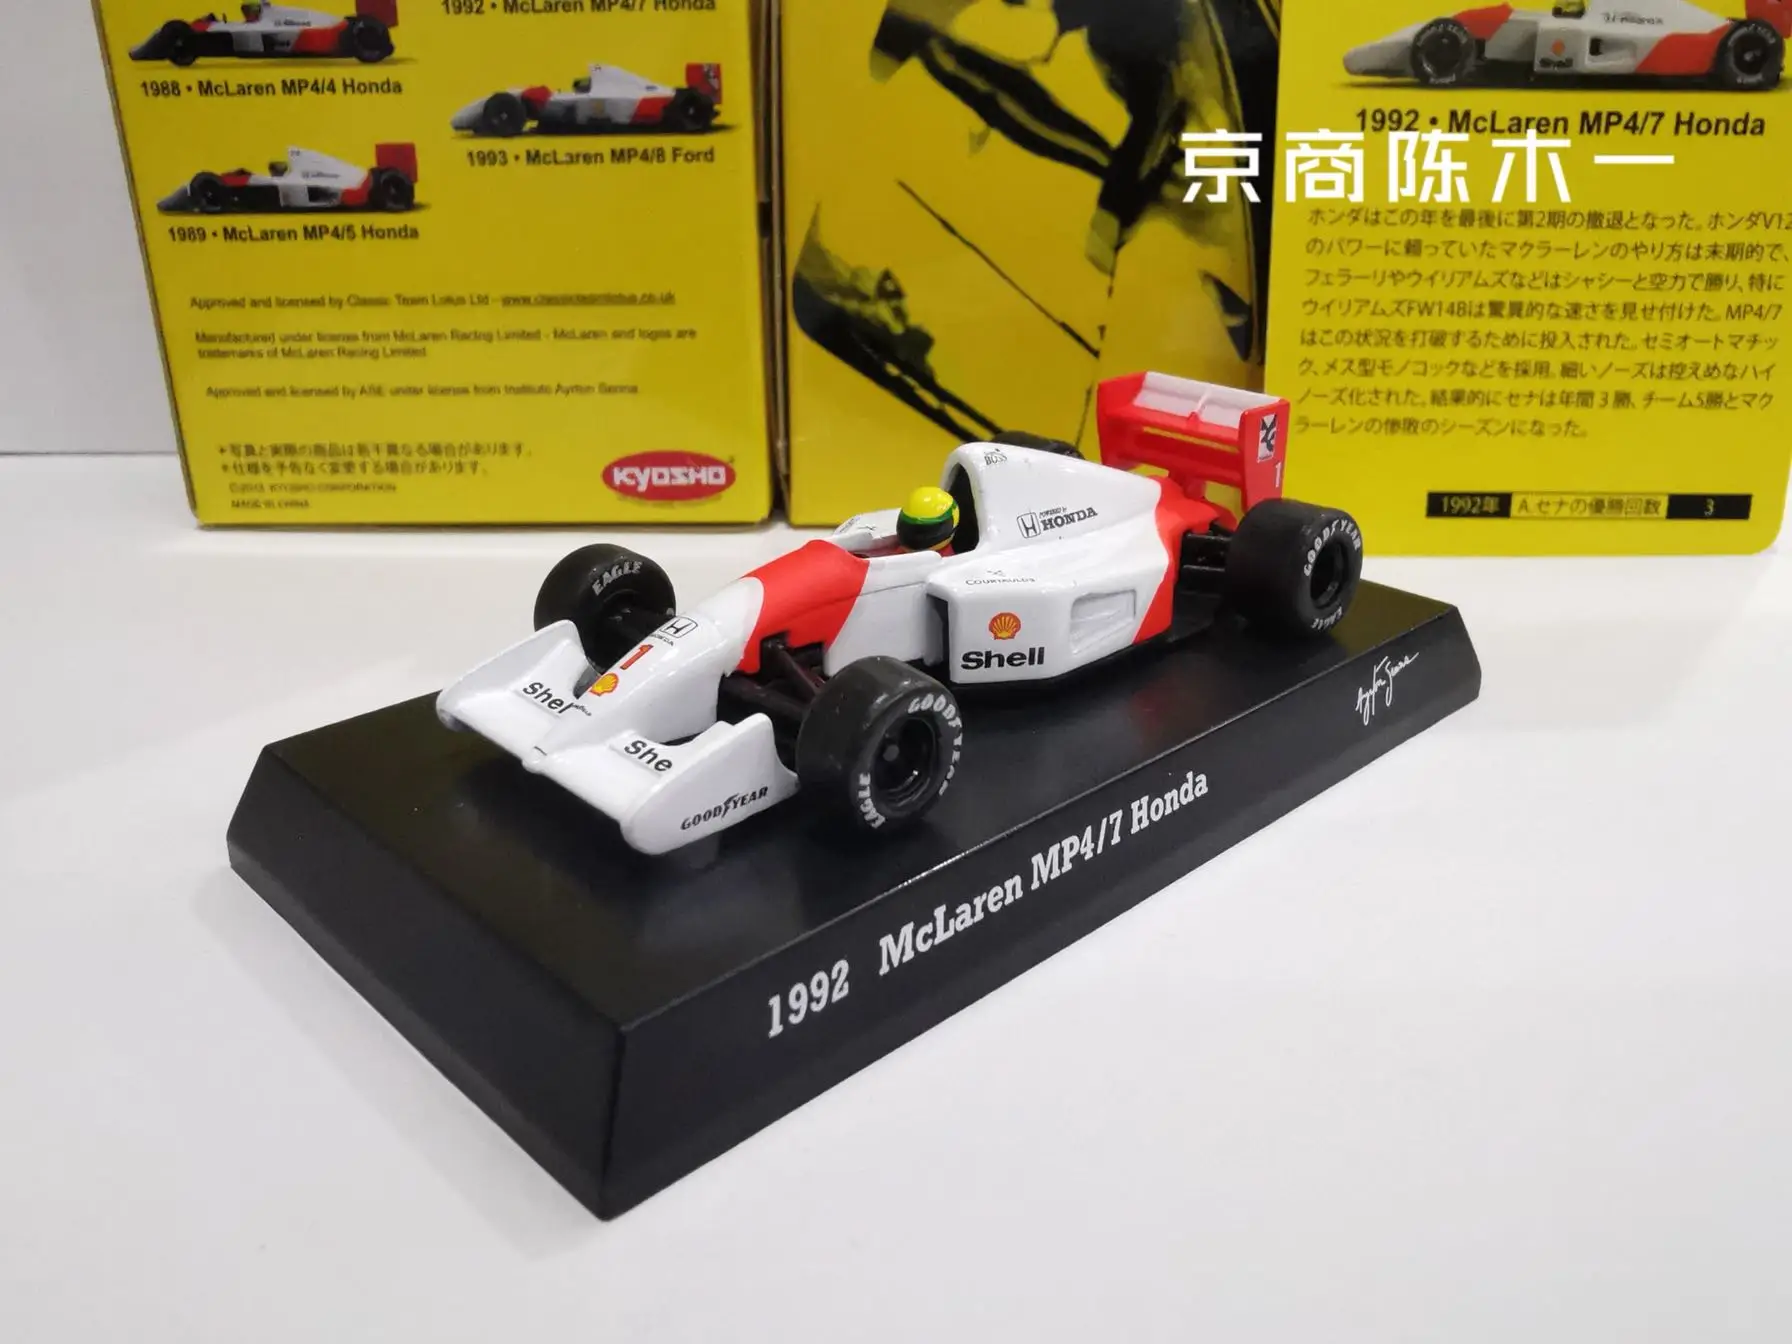 

KYOSHO 1:64 1992 McLaren MP4/7 #1 honda Collection of die cast alloy trolley model ornaments